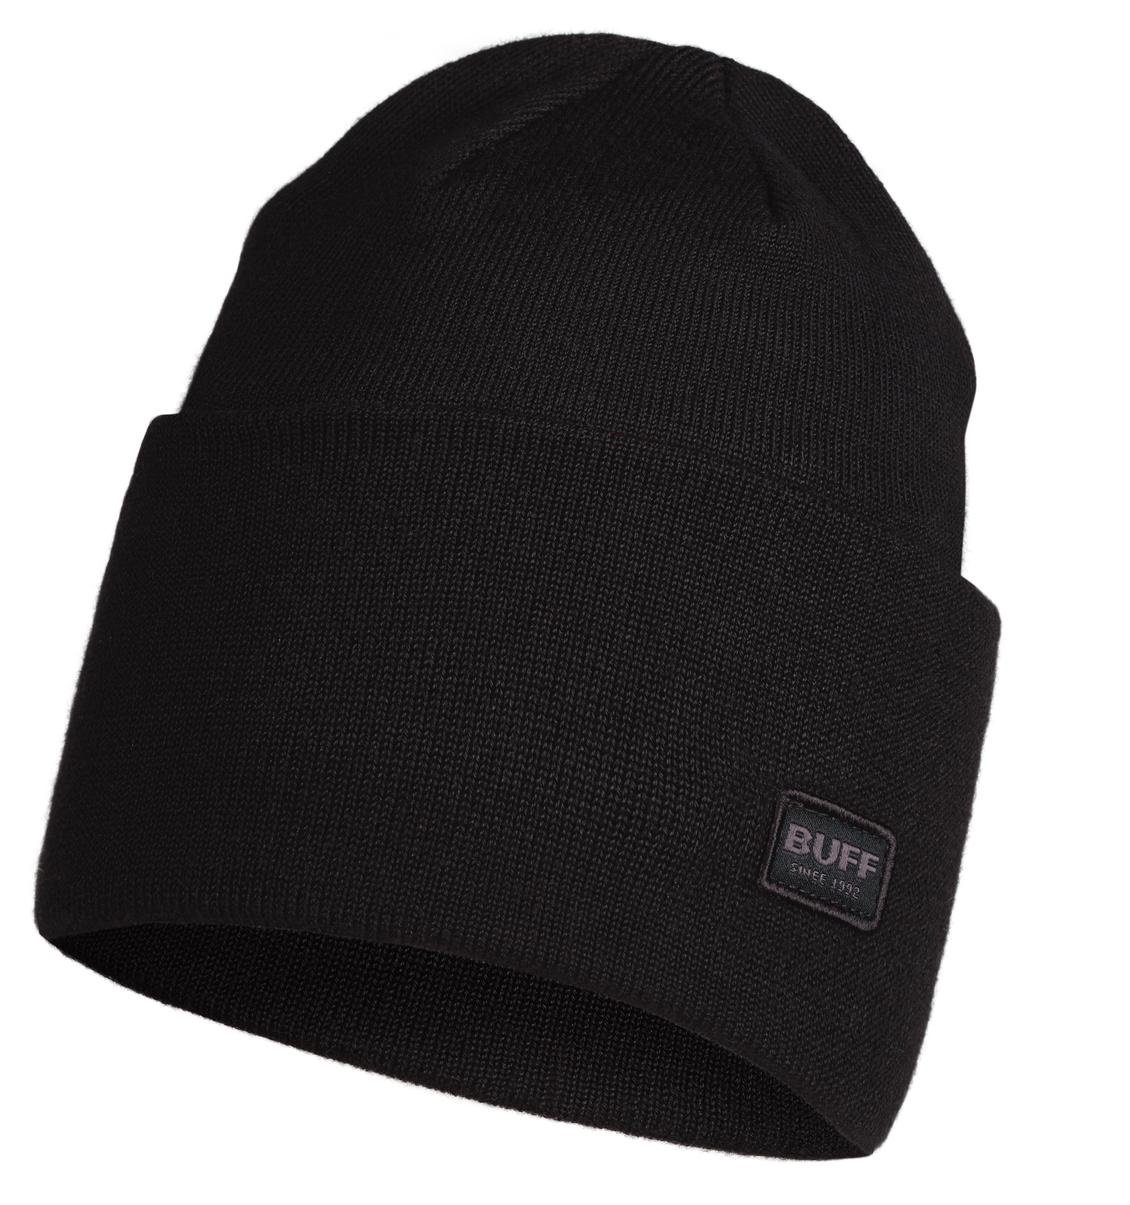 Шапка Buff Knitted Hat Niels Black US:One size, 126457.999.10.00